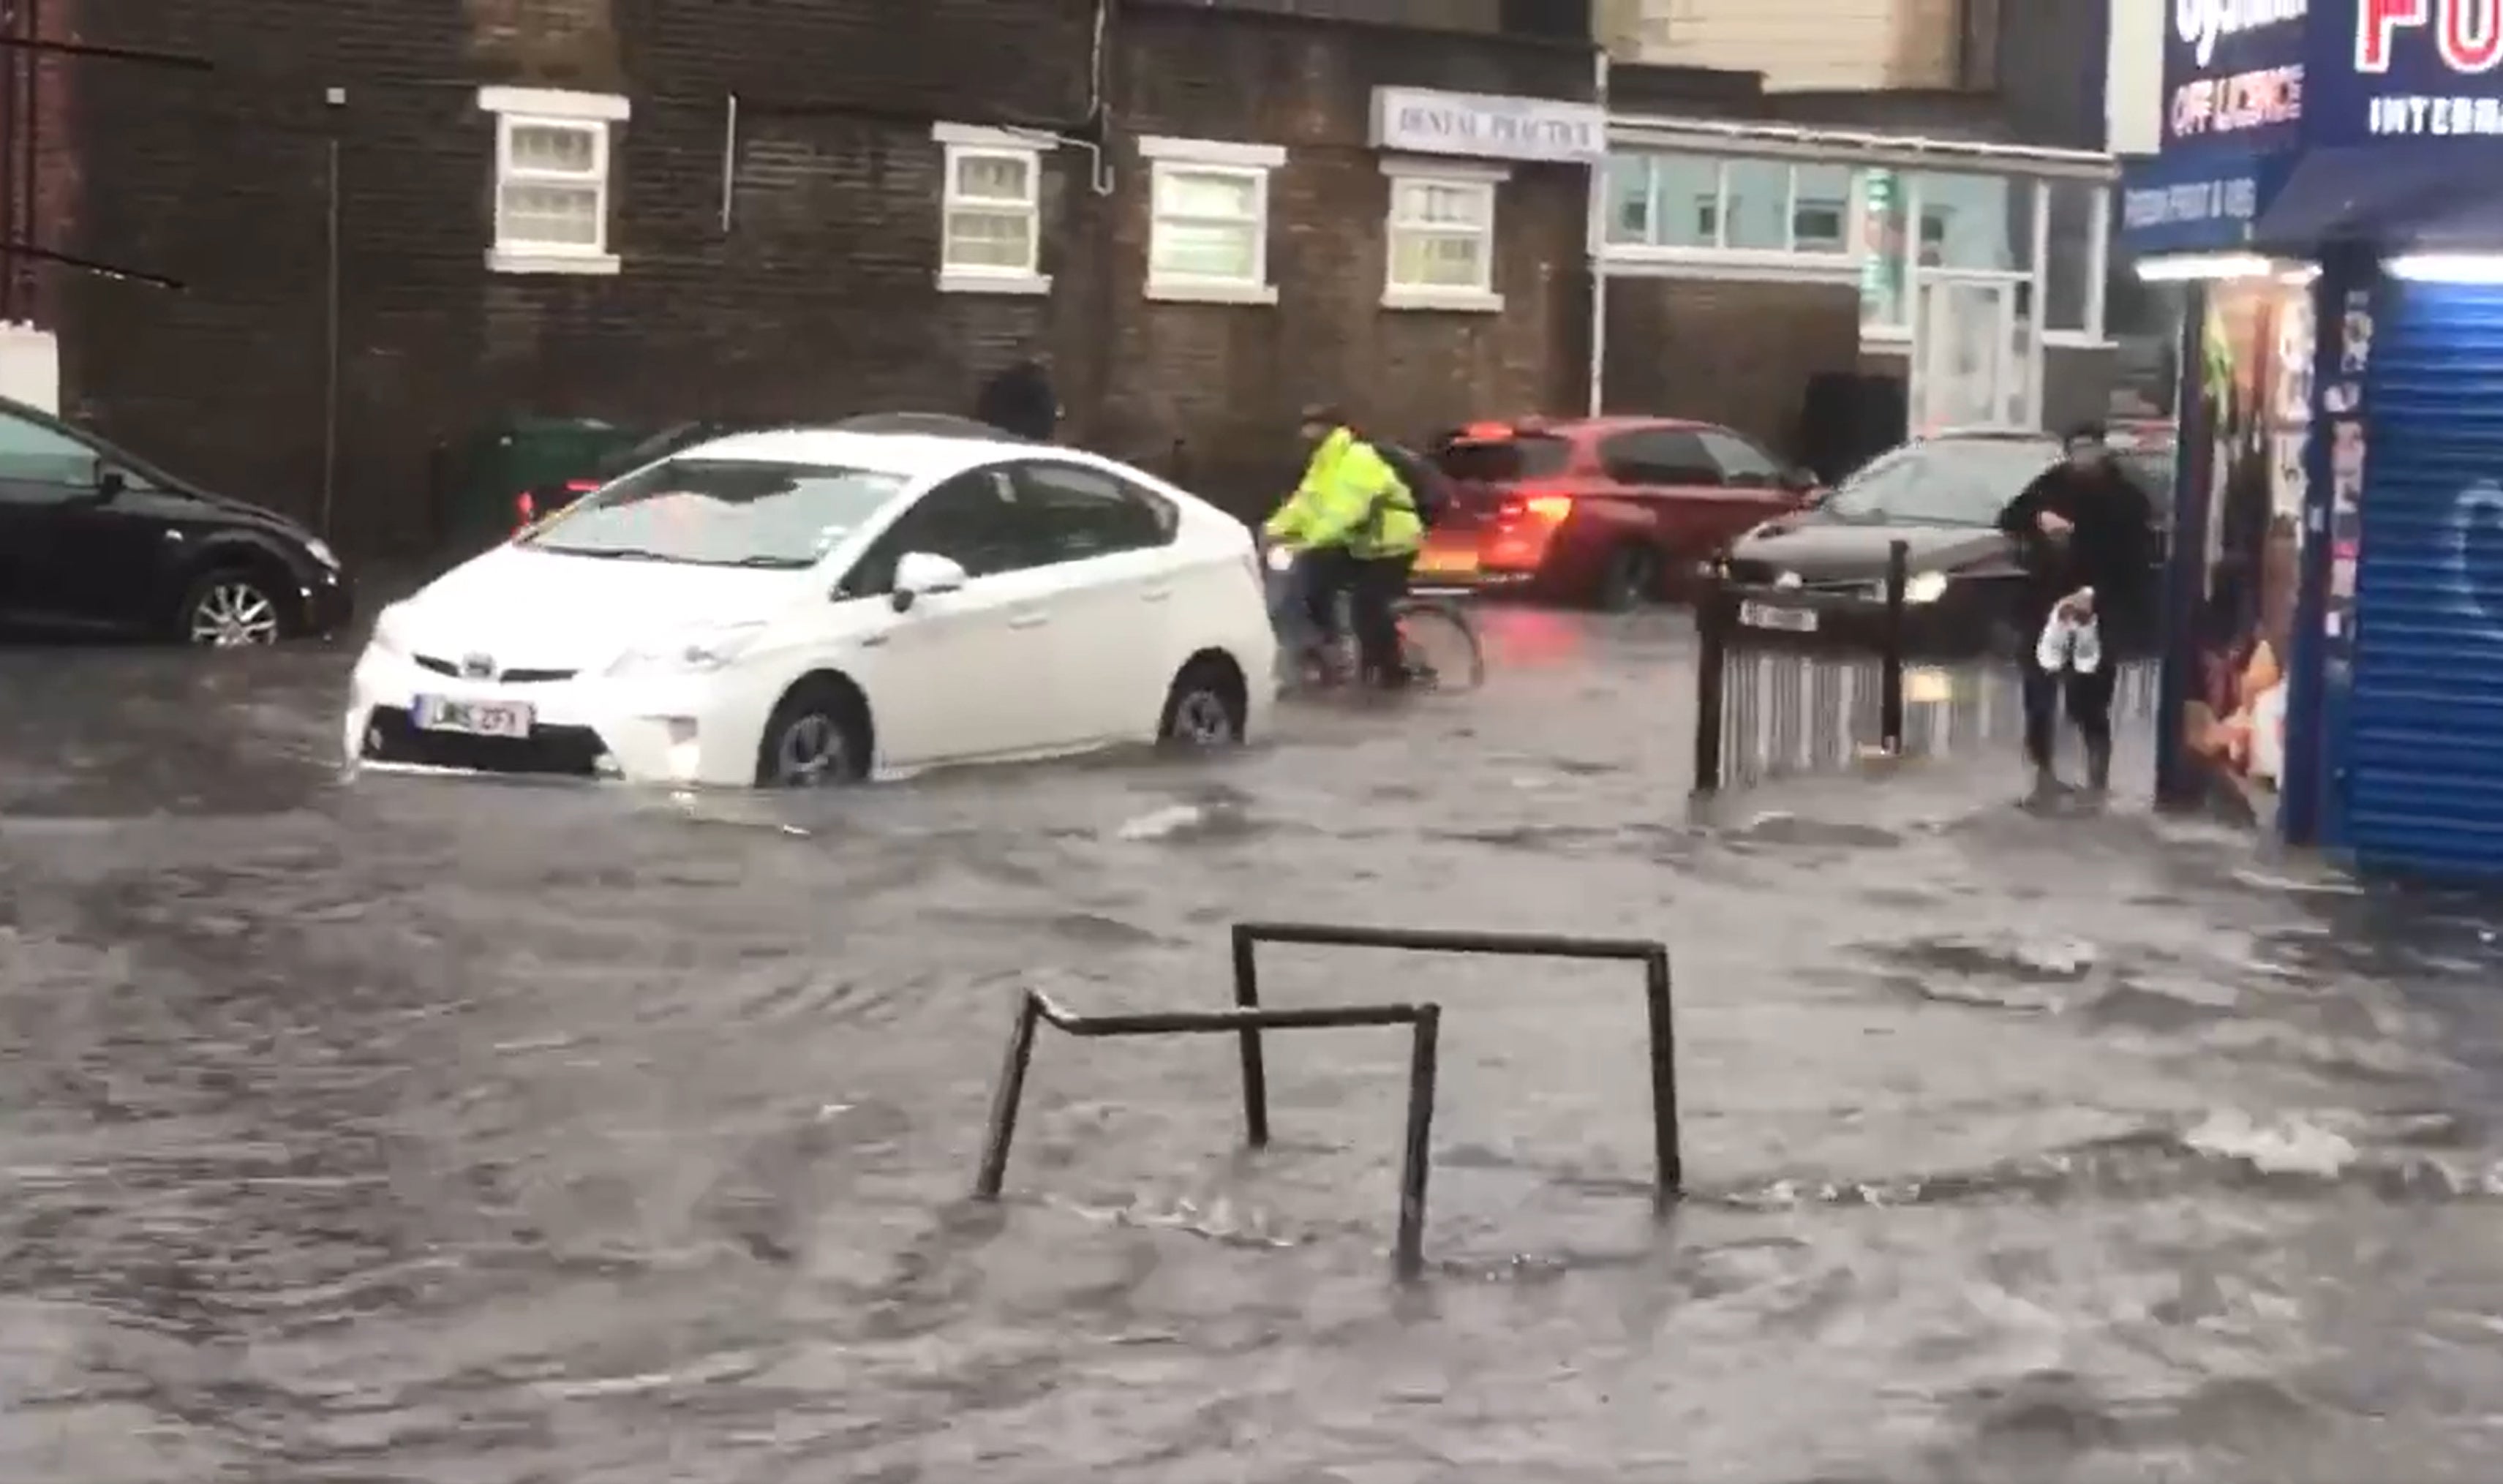 Heavy rain in London on Sunday caused flash floods in many parts of the capital